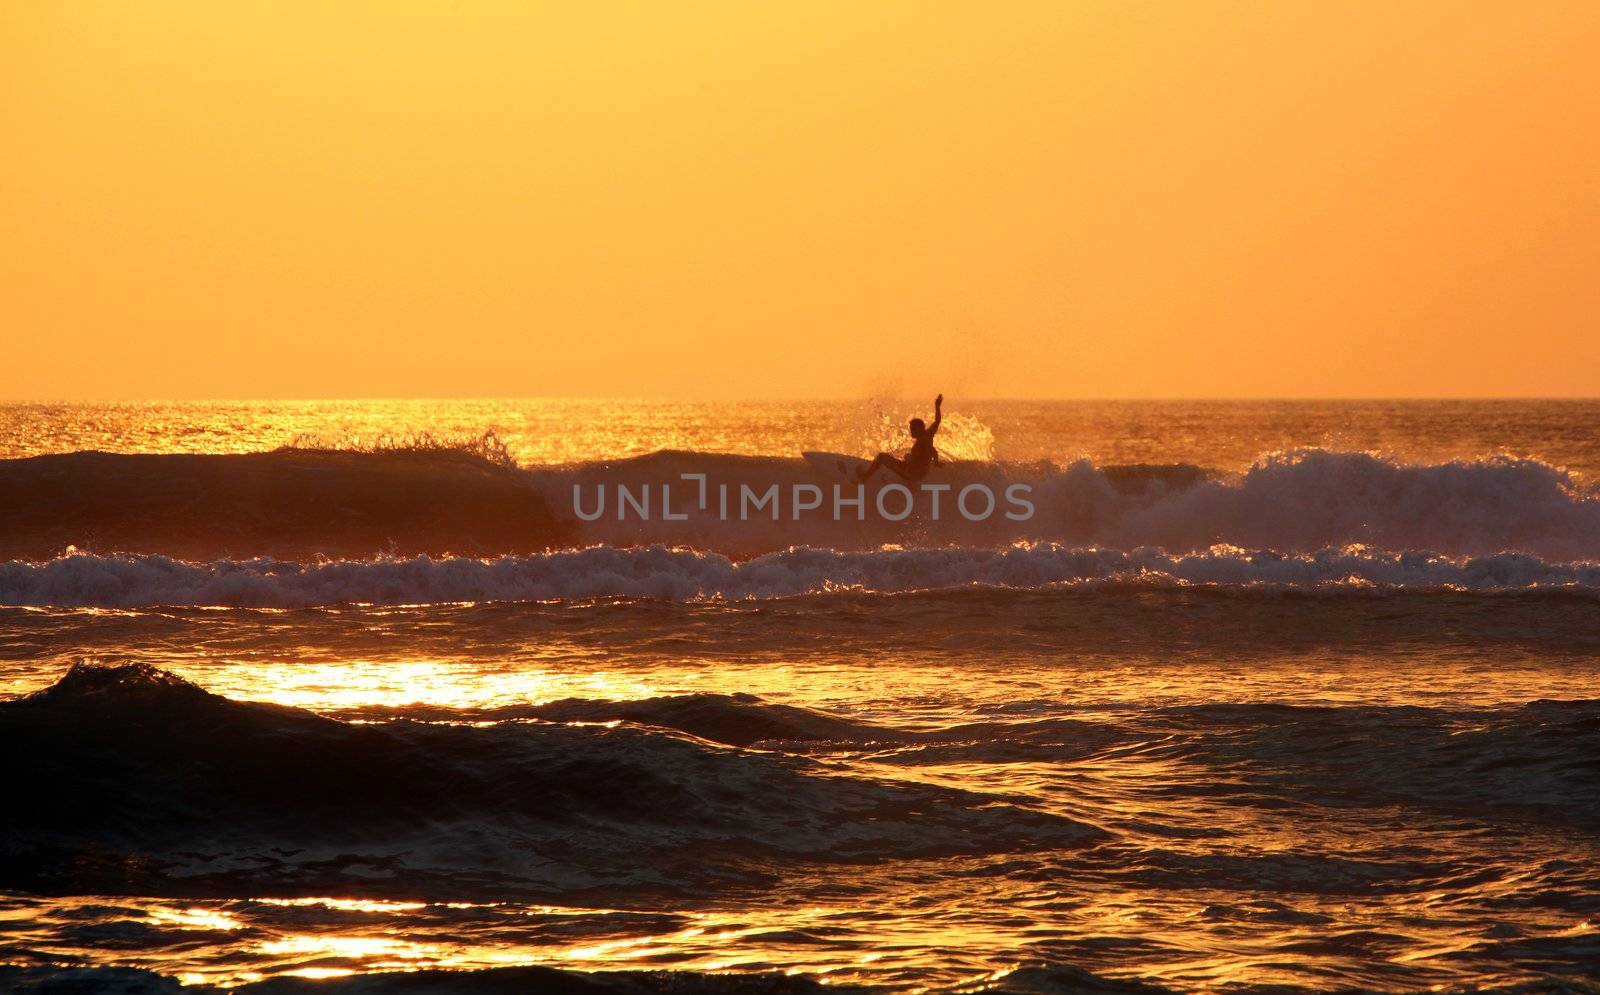 Surfer rides waves at sunset, Bali, Indonesia